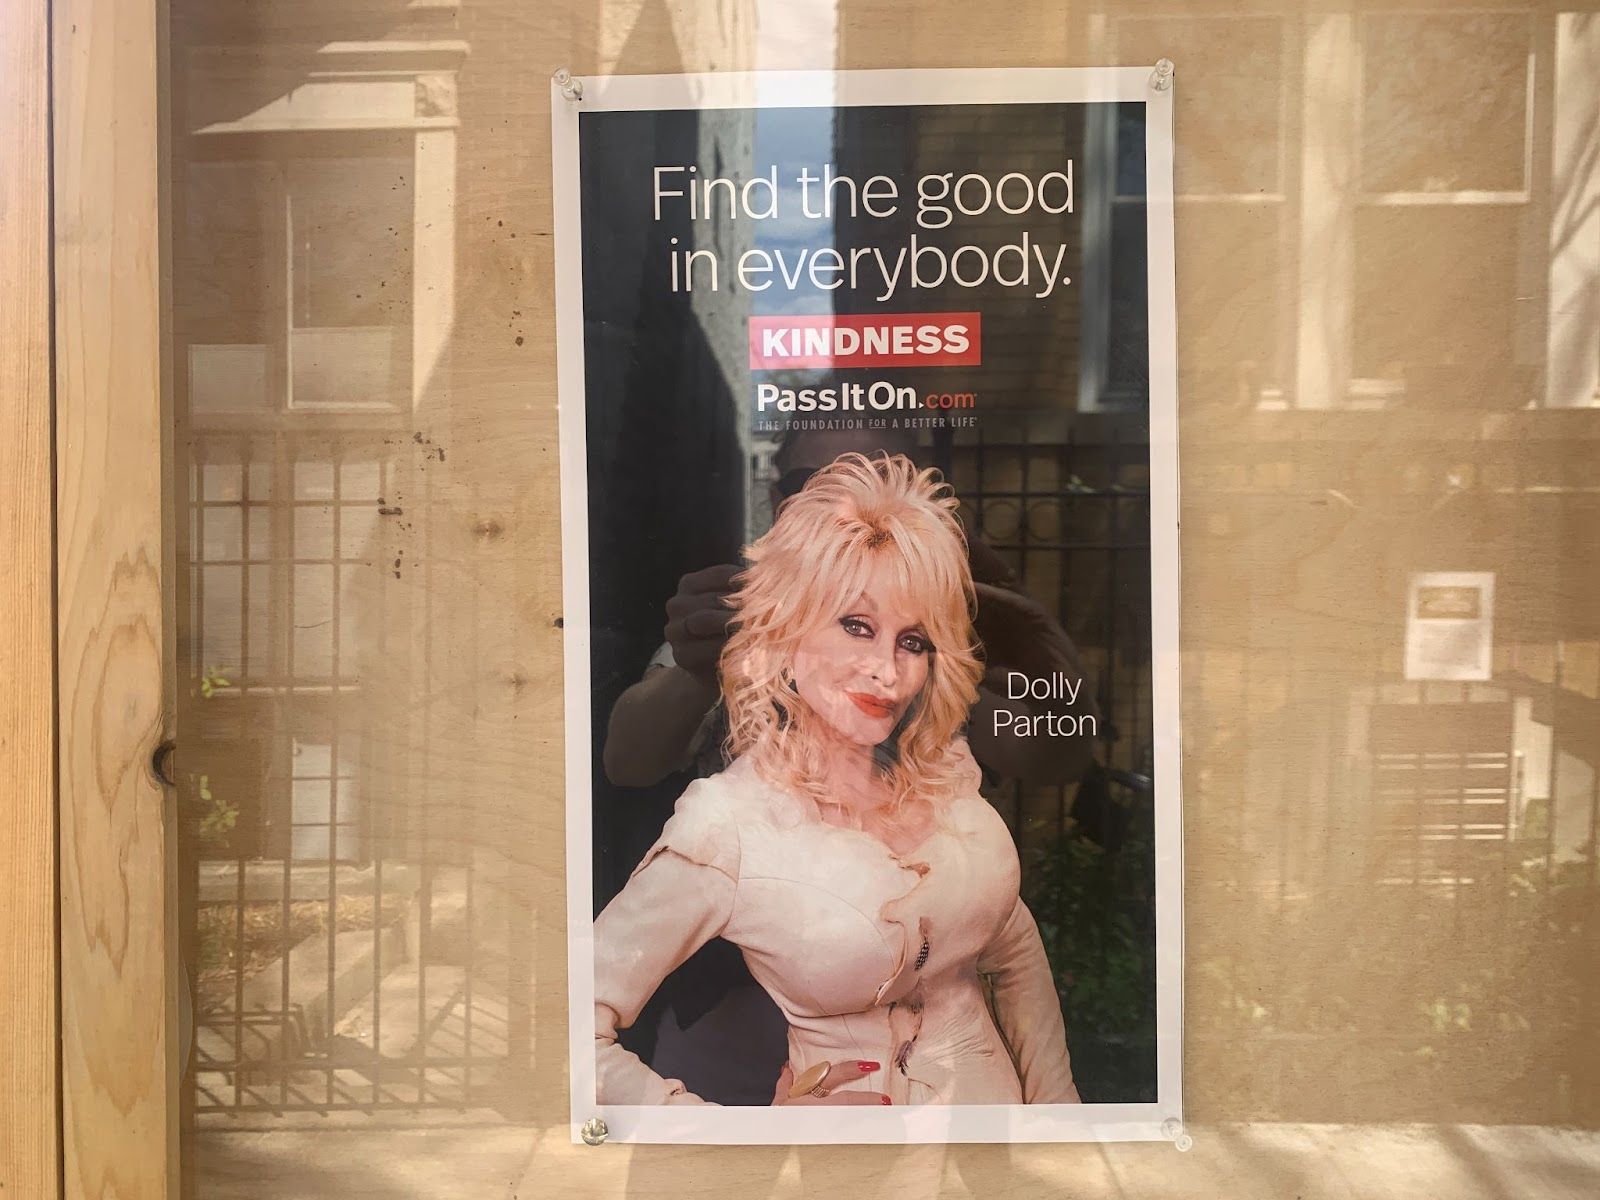 A Dolly Parton sign in a window